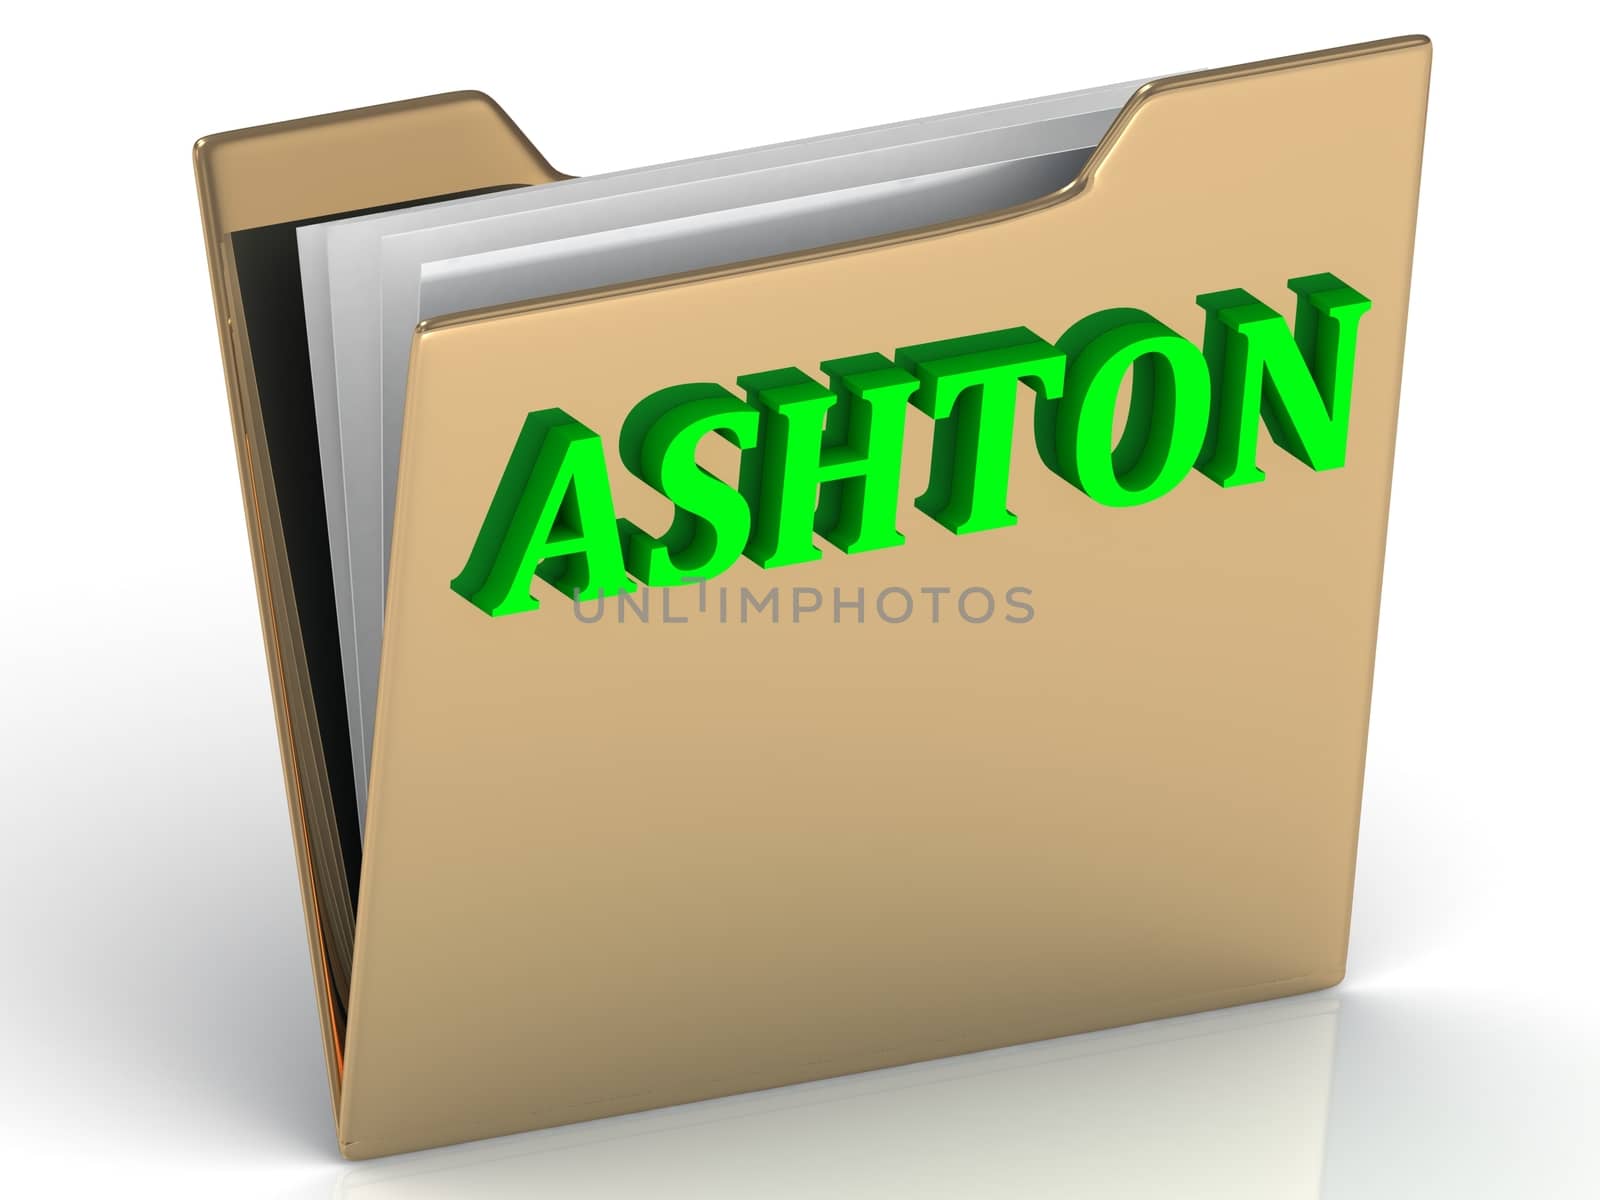 ASHTON- bright green letters on gold paperwork folder by GreenMost